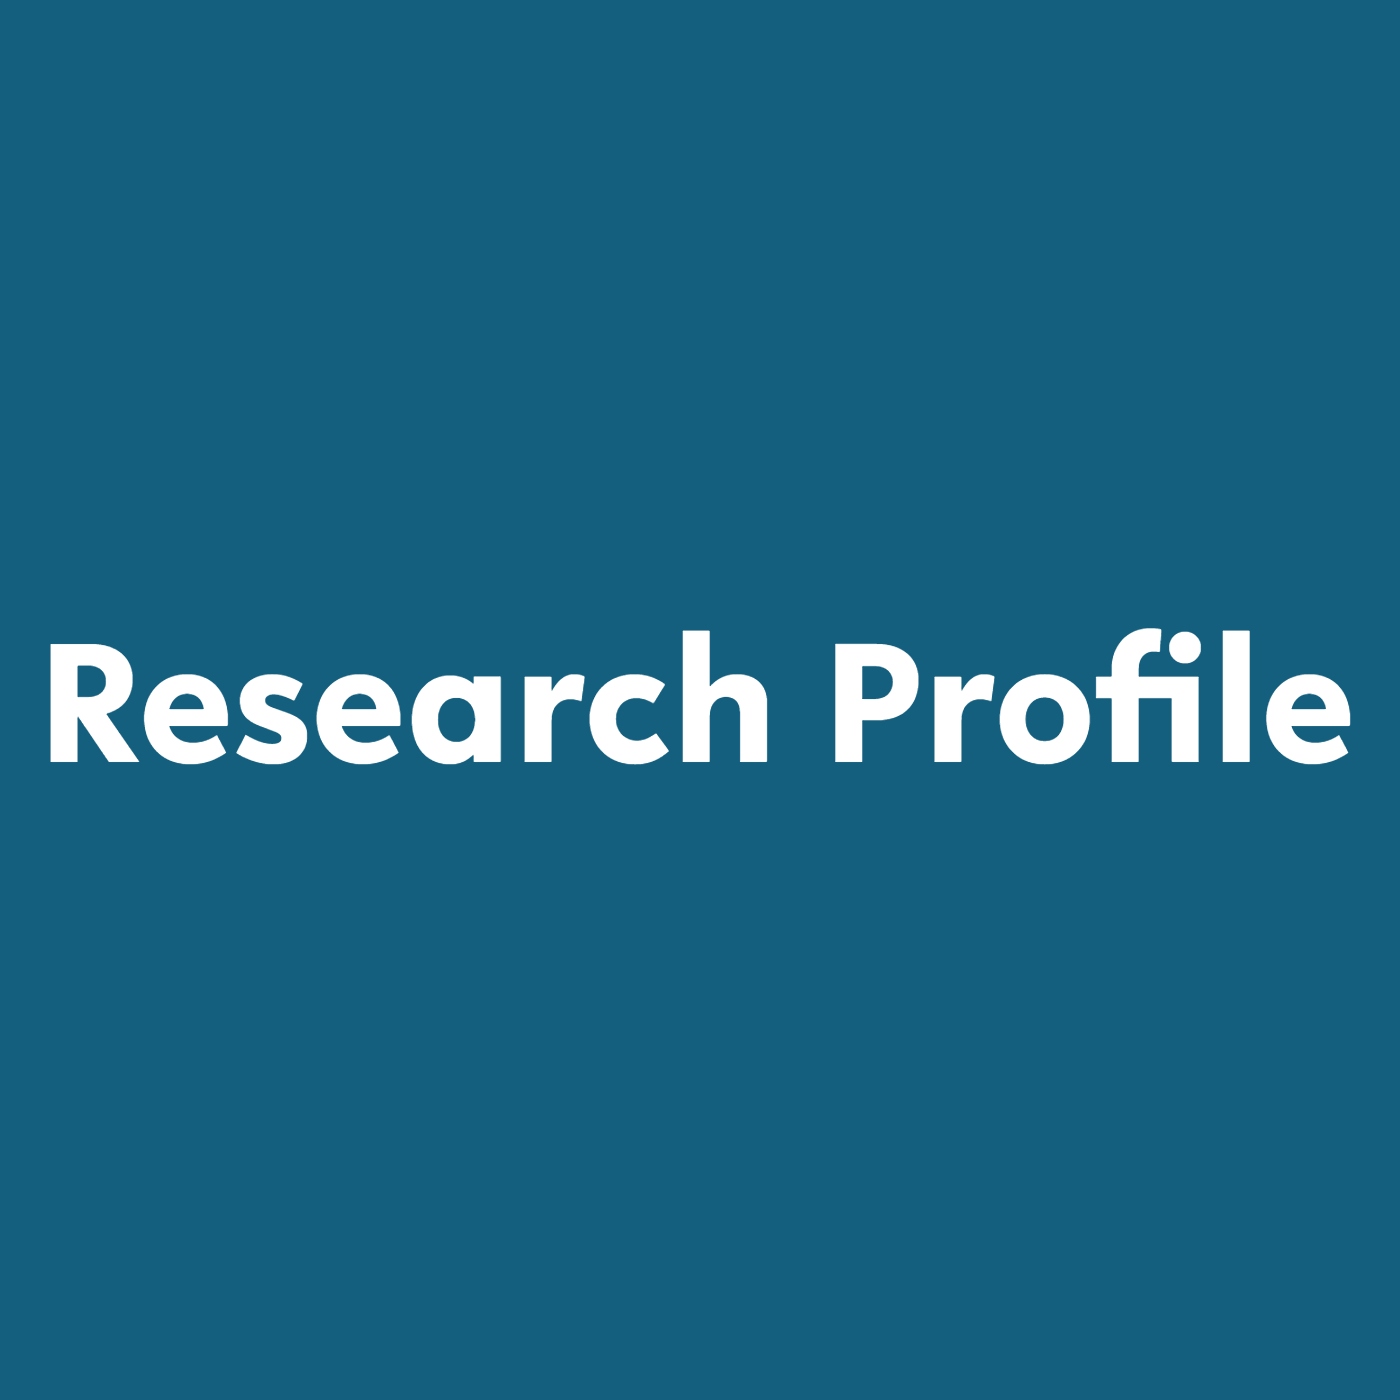 Blue box with text Research Profile